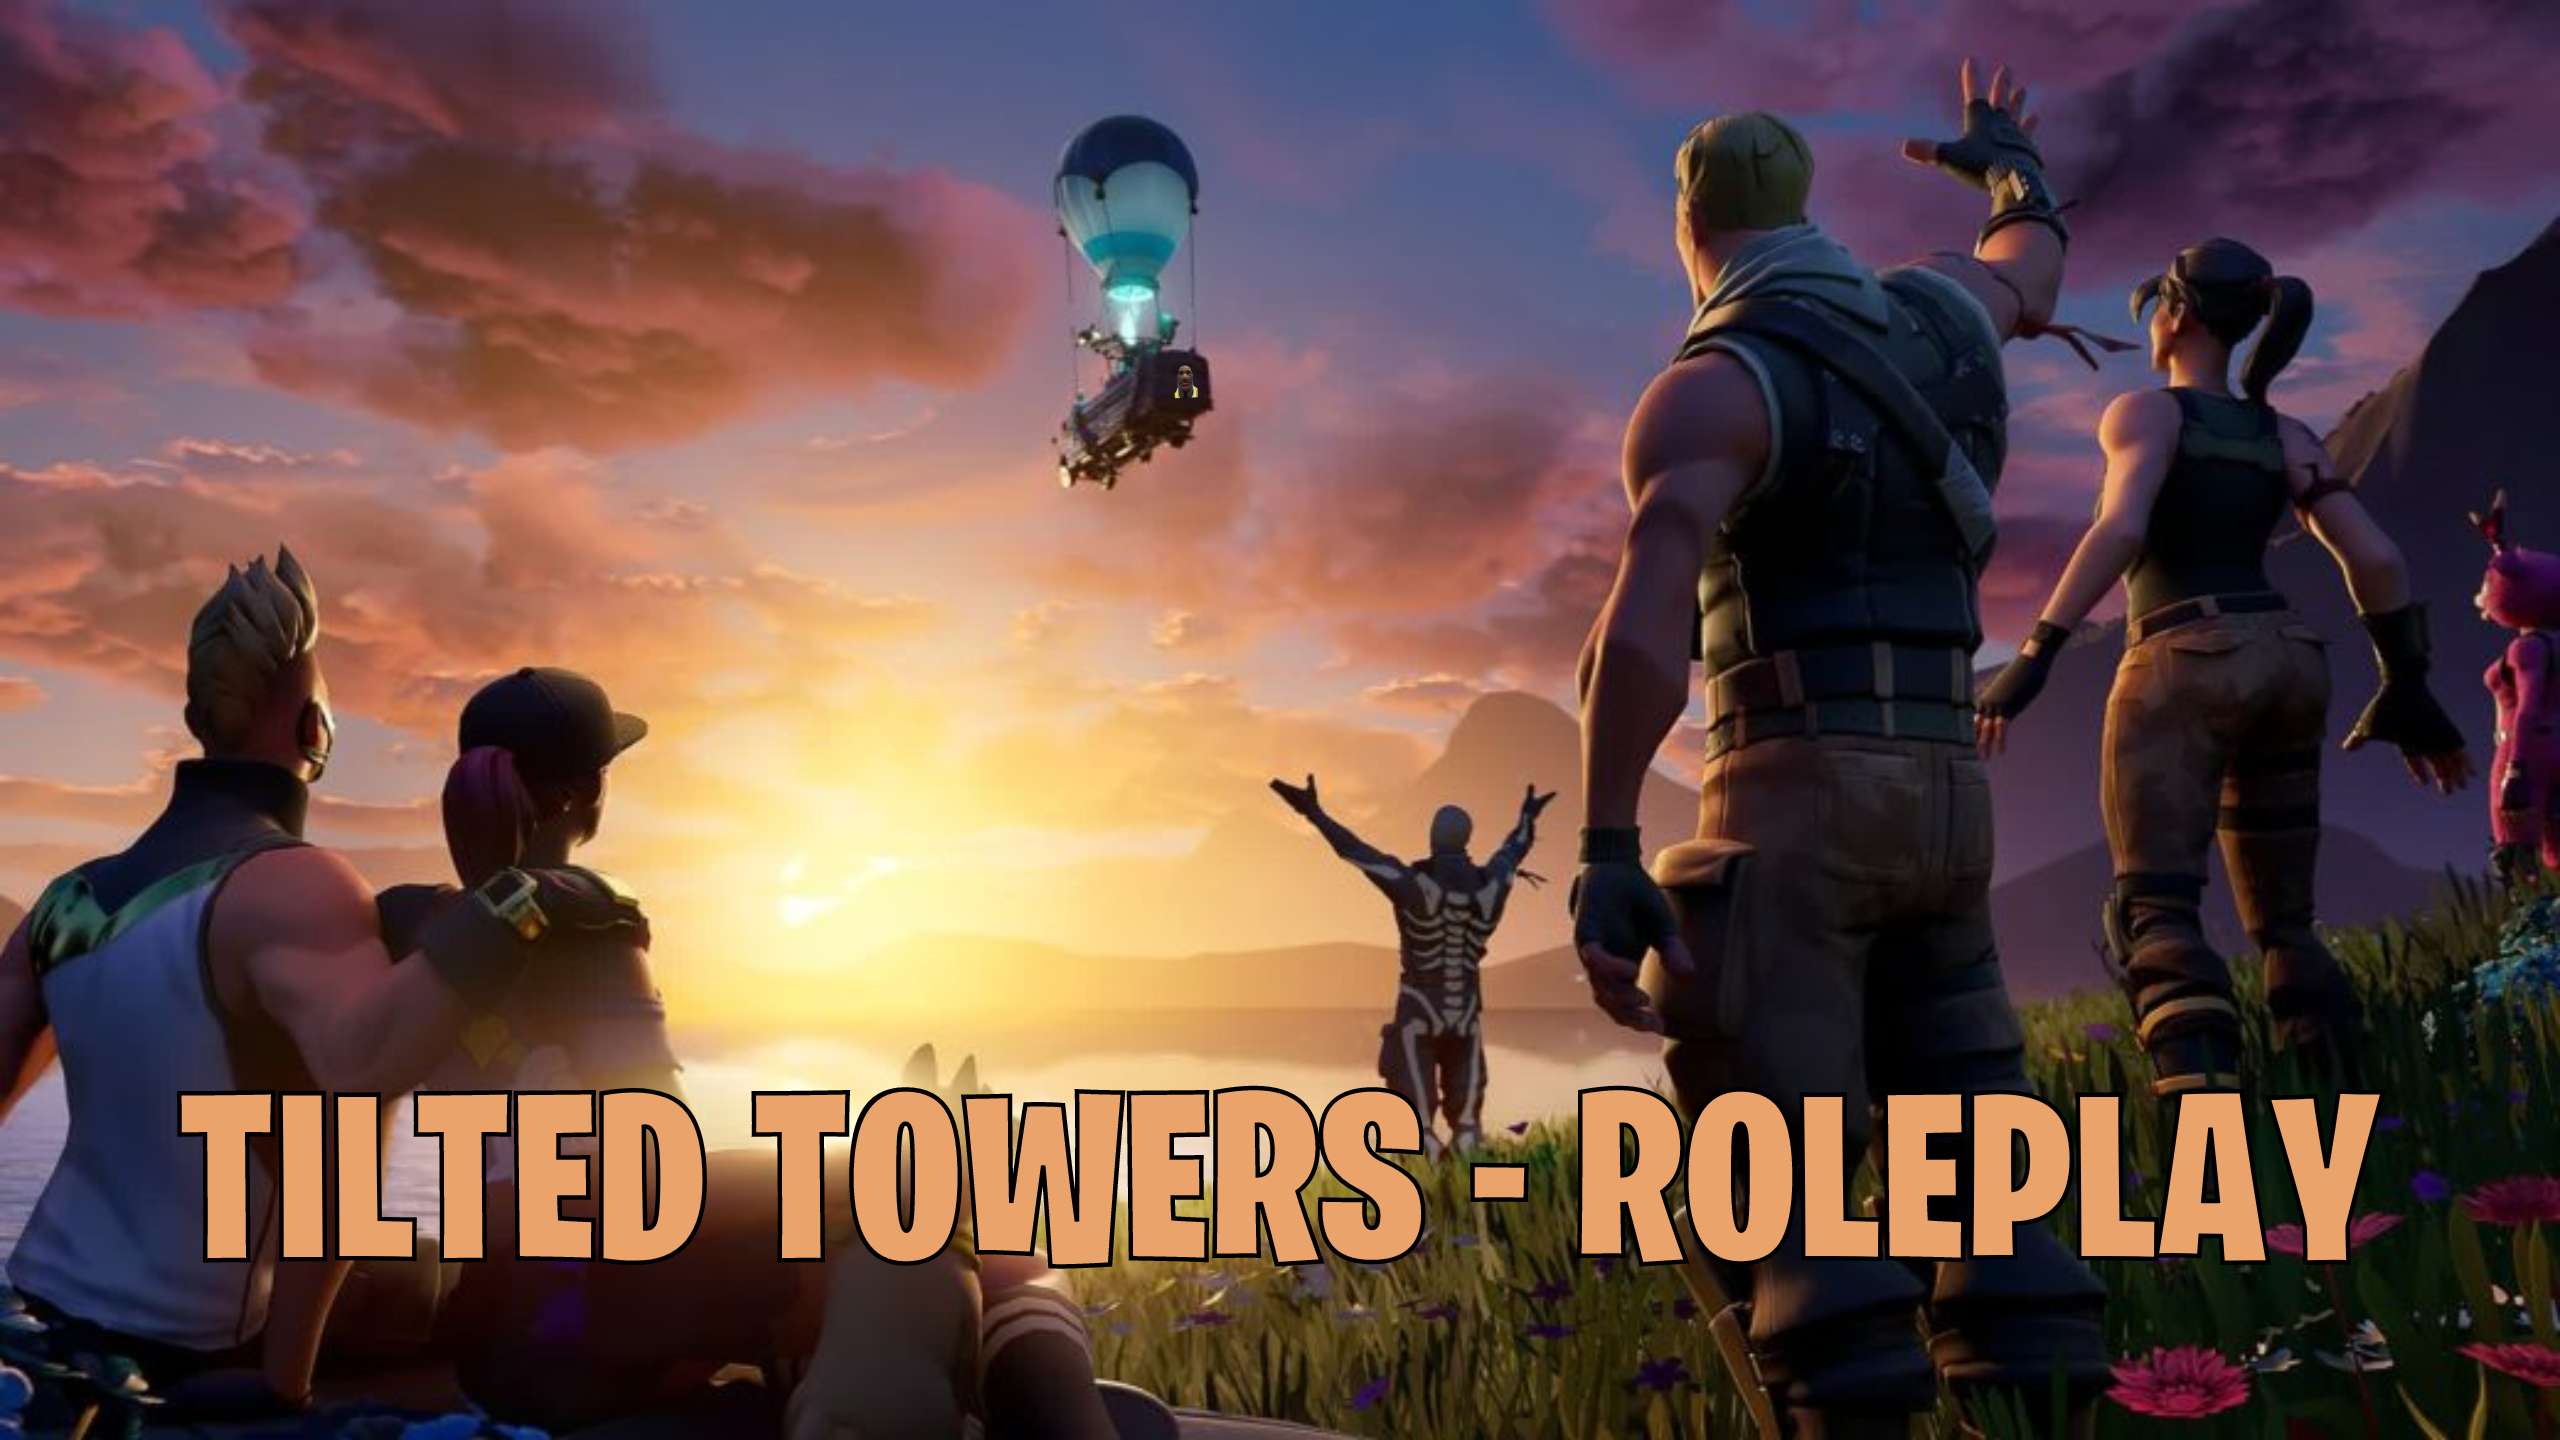 ⭐ TILTED TOWERS - ROLEPLAY ⭐